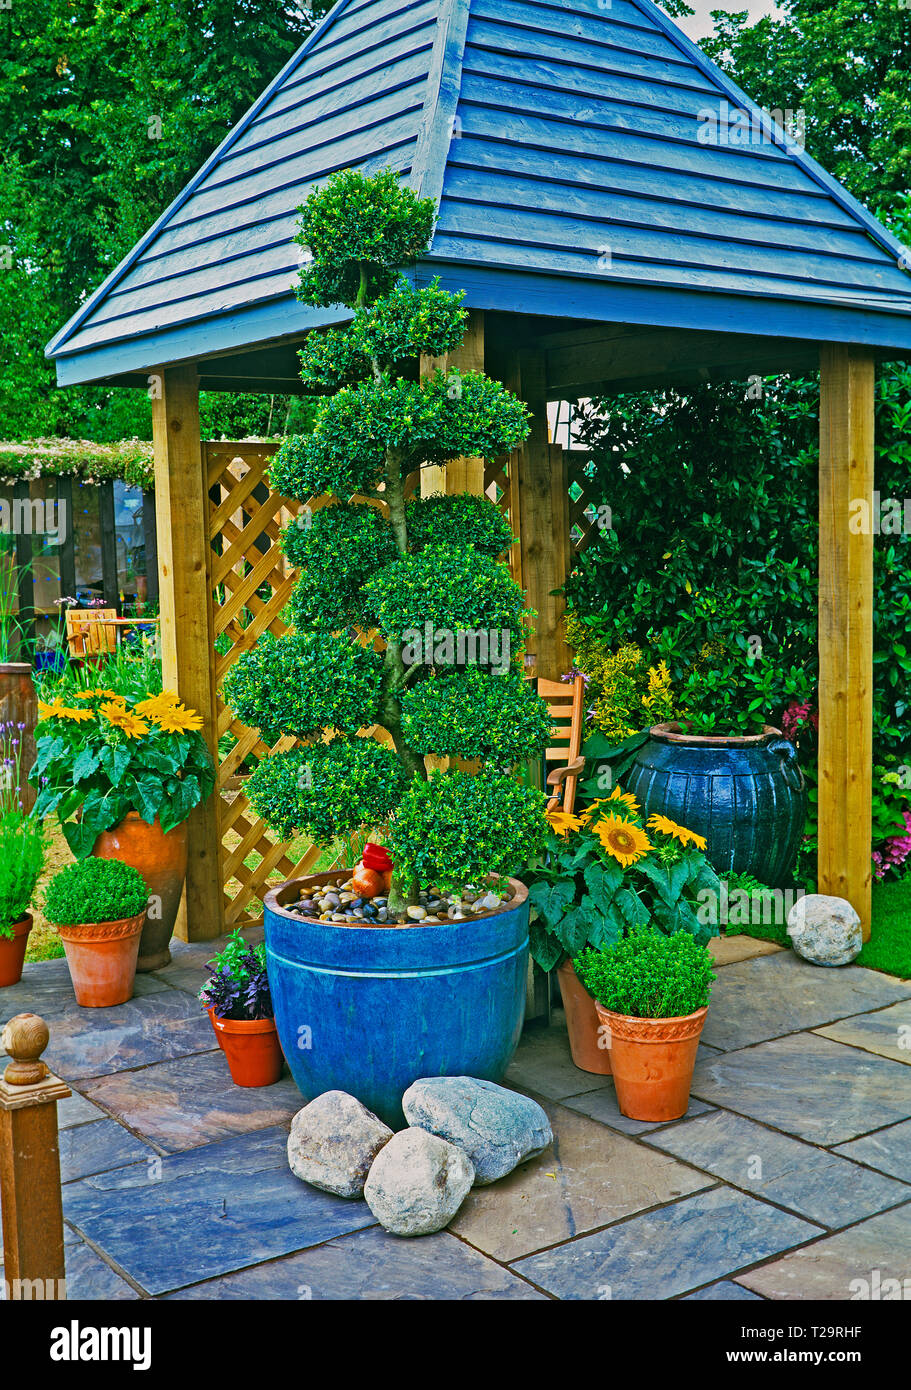 A colourful urban garden with planted containers of flowers and a cloud pruned topiary tree with covered seating area Stock Photo